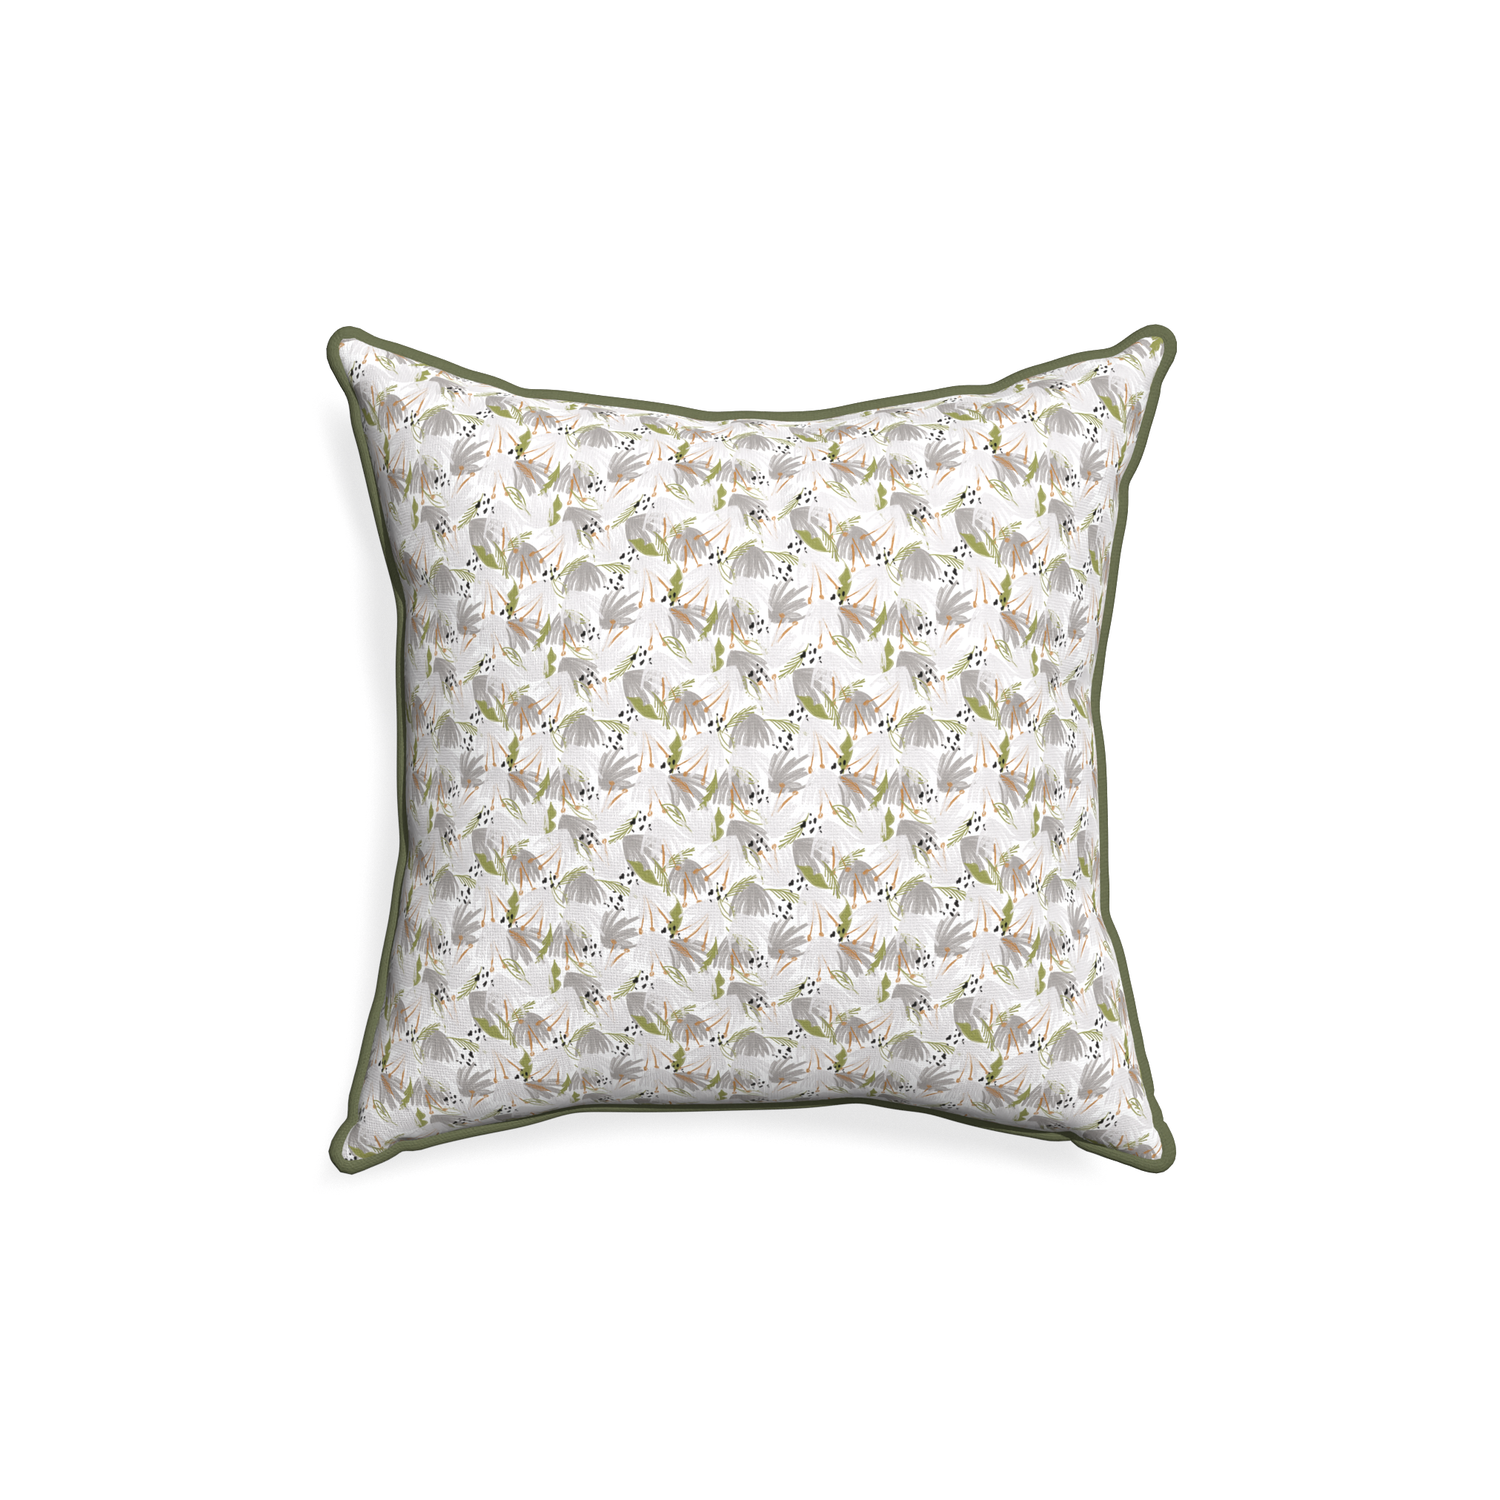 18-square eden grey custom pillow with f piping on white background